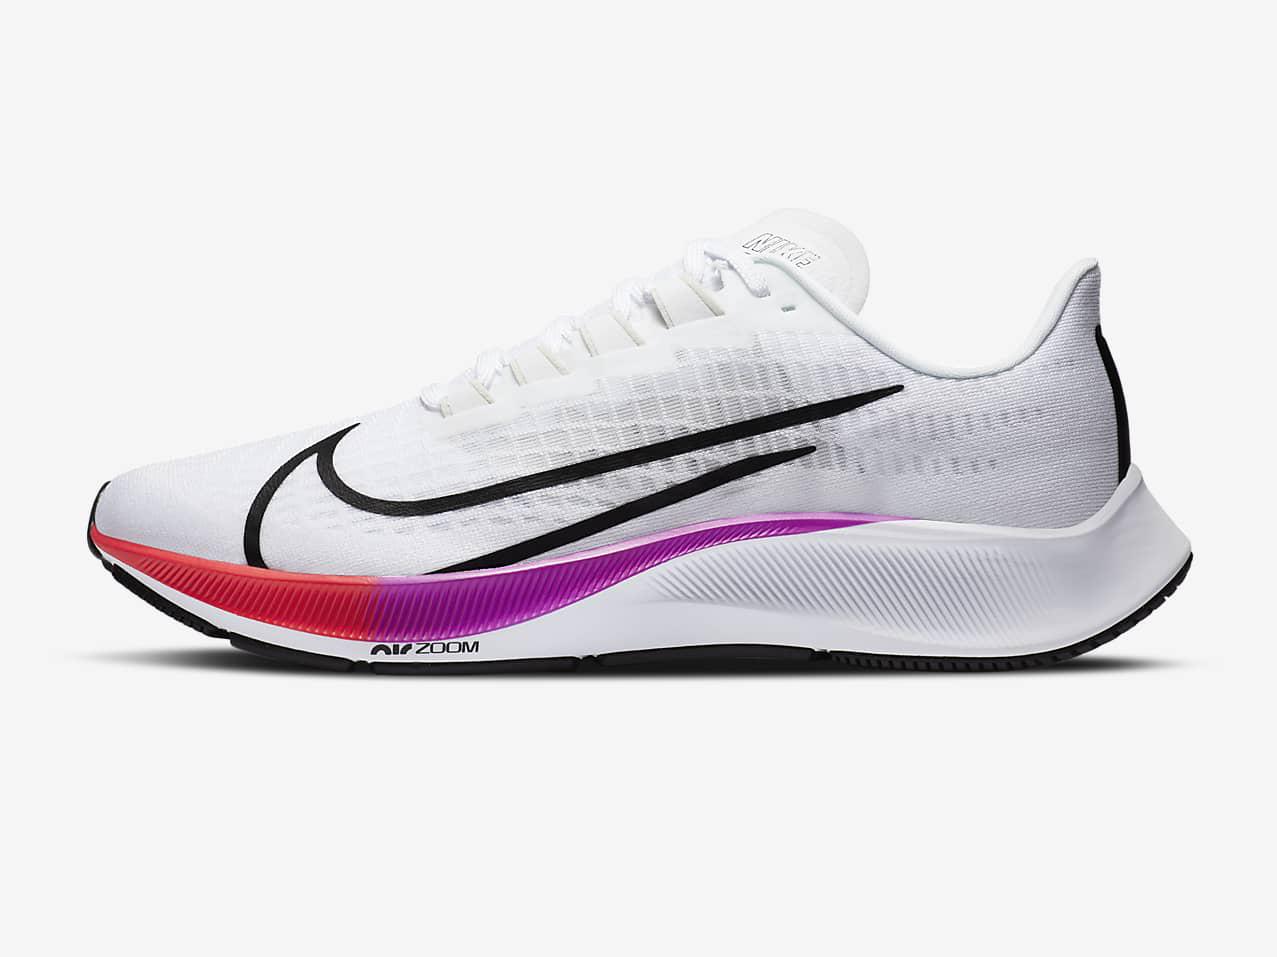 Nike Air Zoom Pegasus 37 Womens Running Shoes for $59.50 Shipped